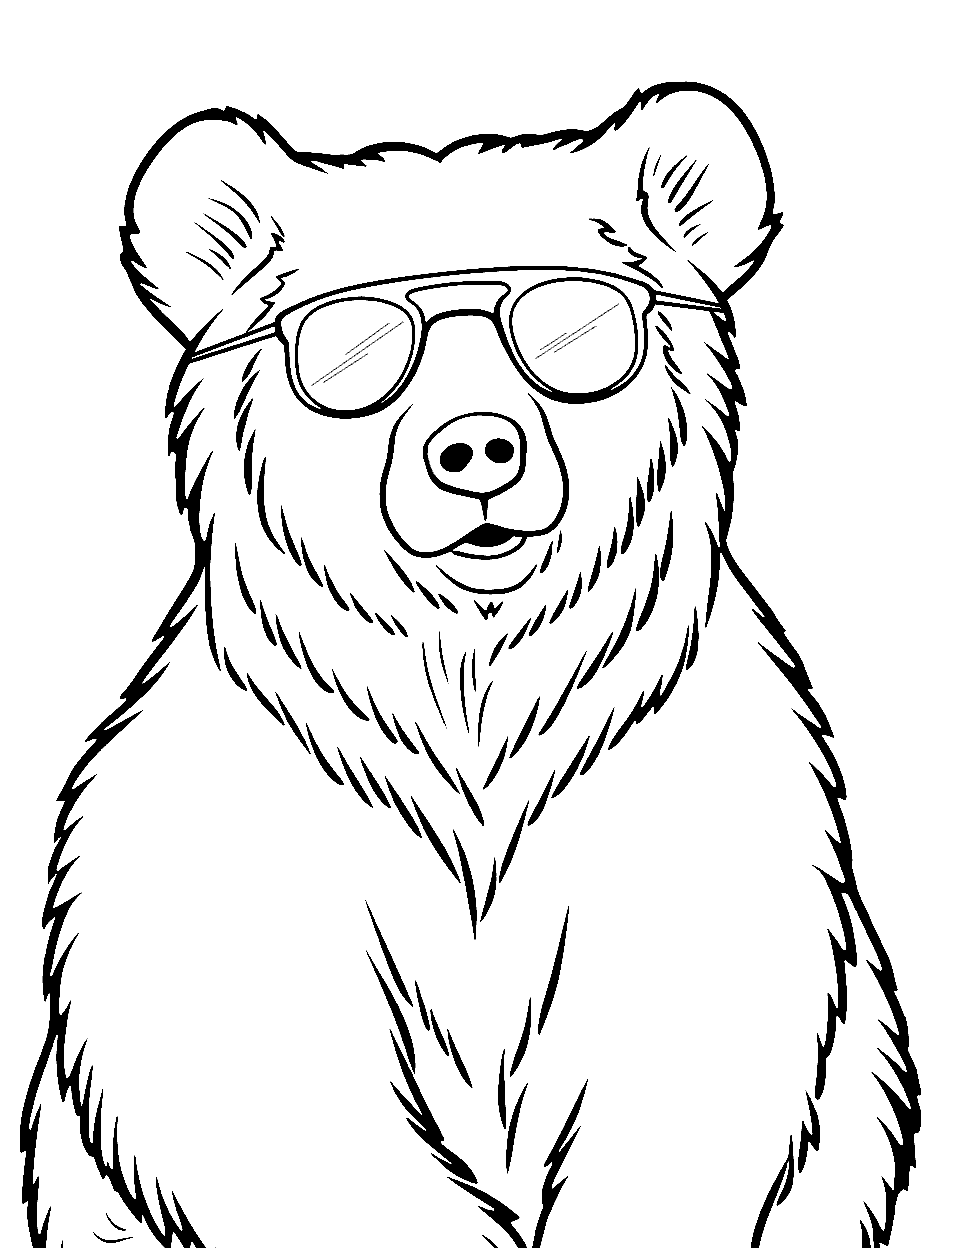 Cool Bear with Sunglasses Coloring Page - A bear chilling wearing trendy sunglasses.